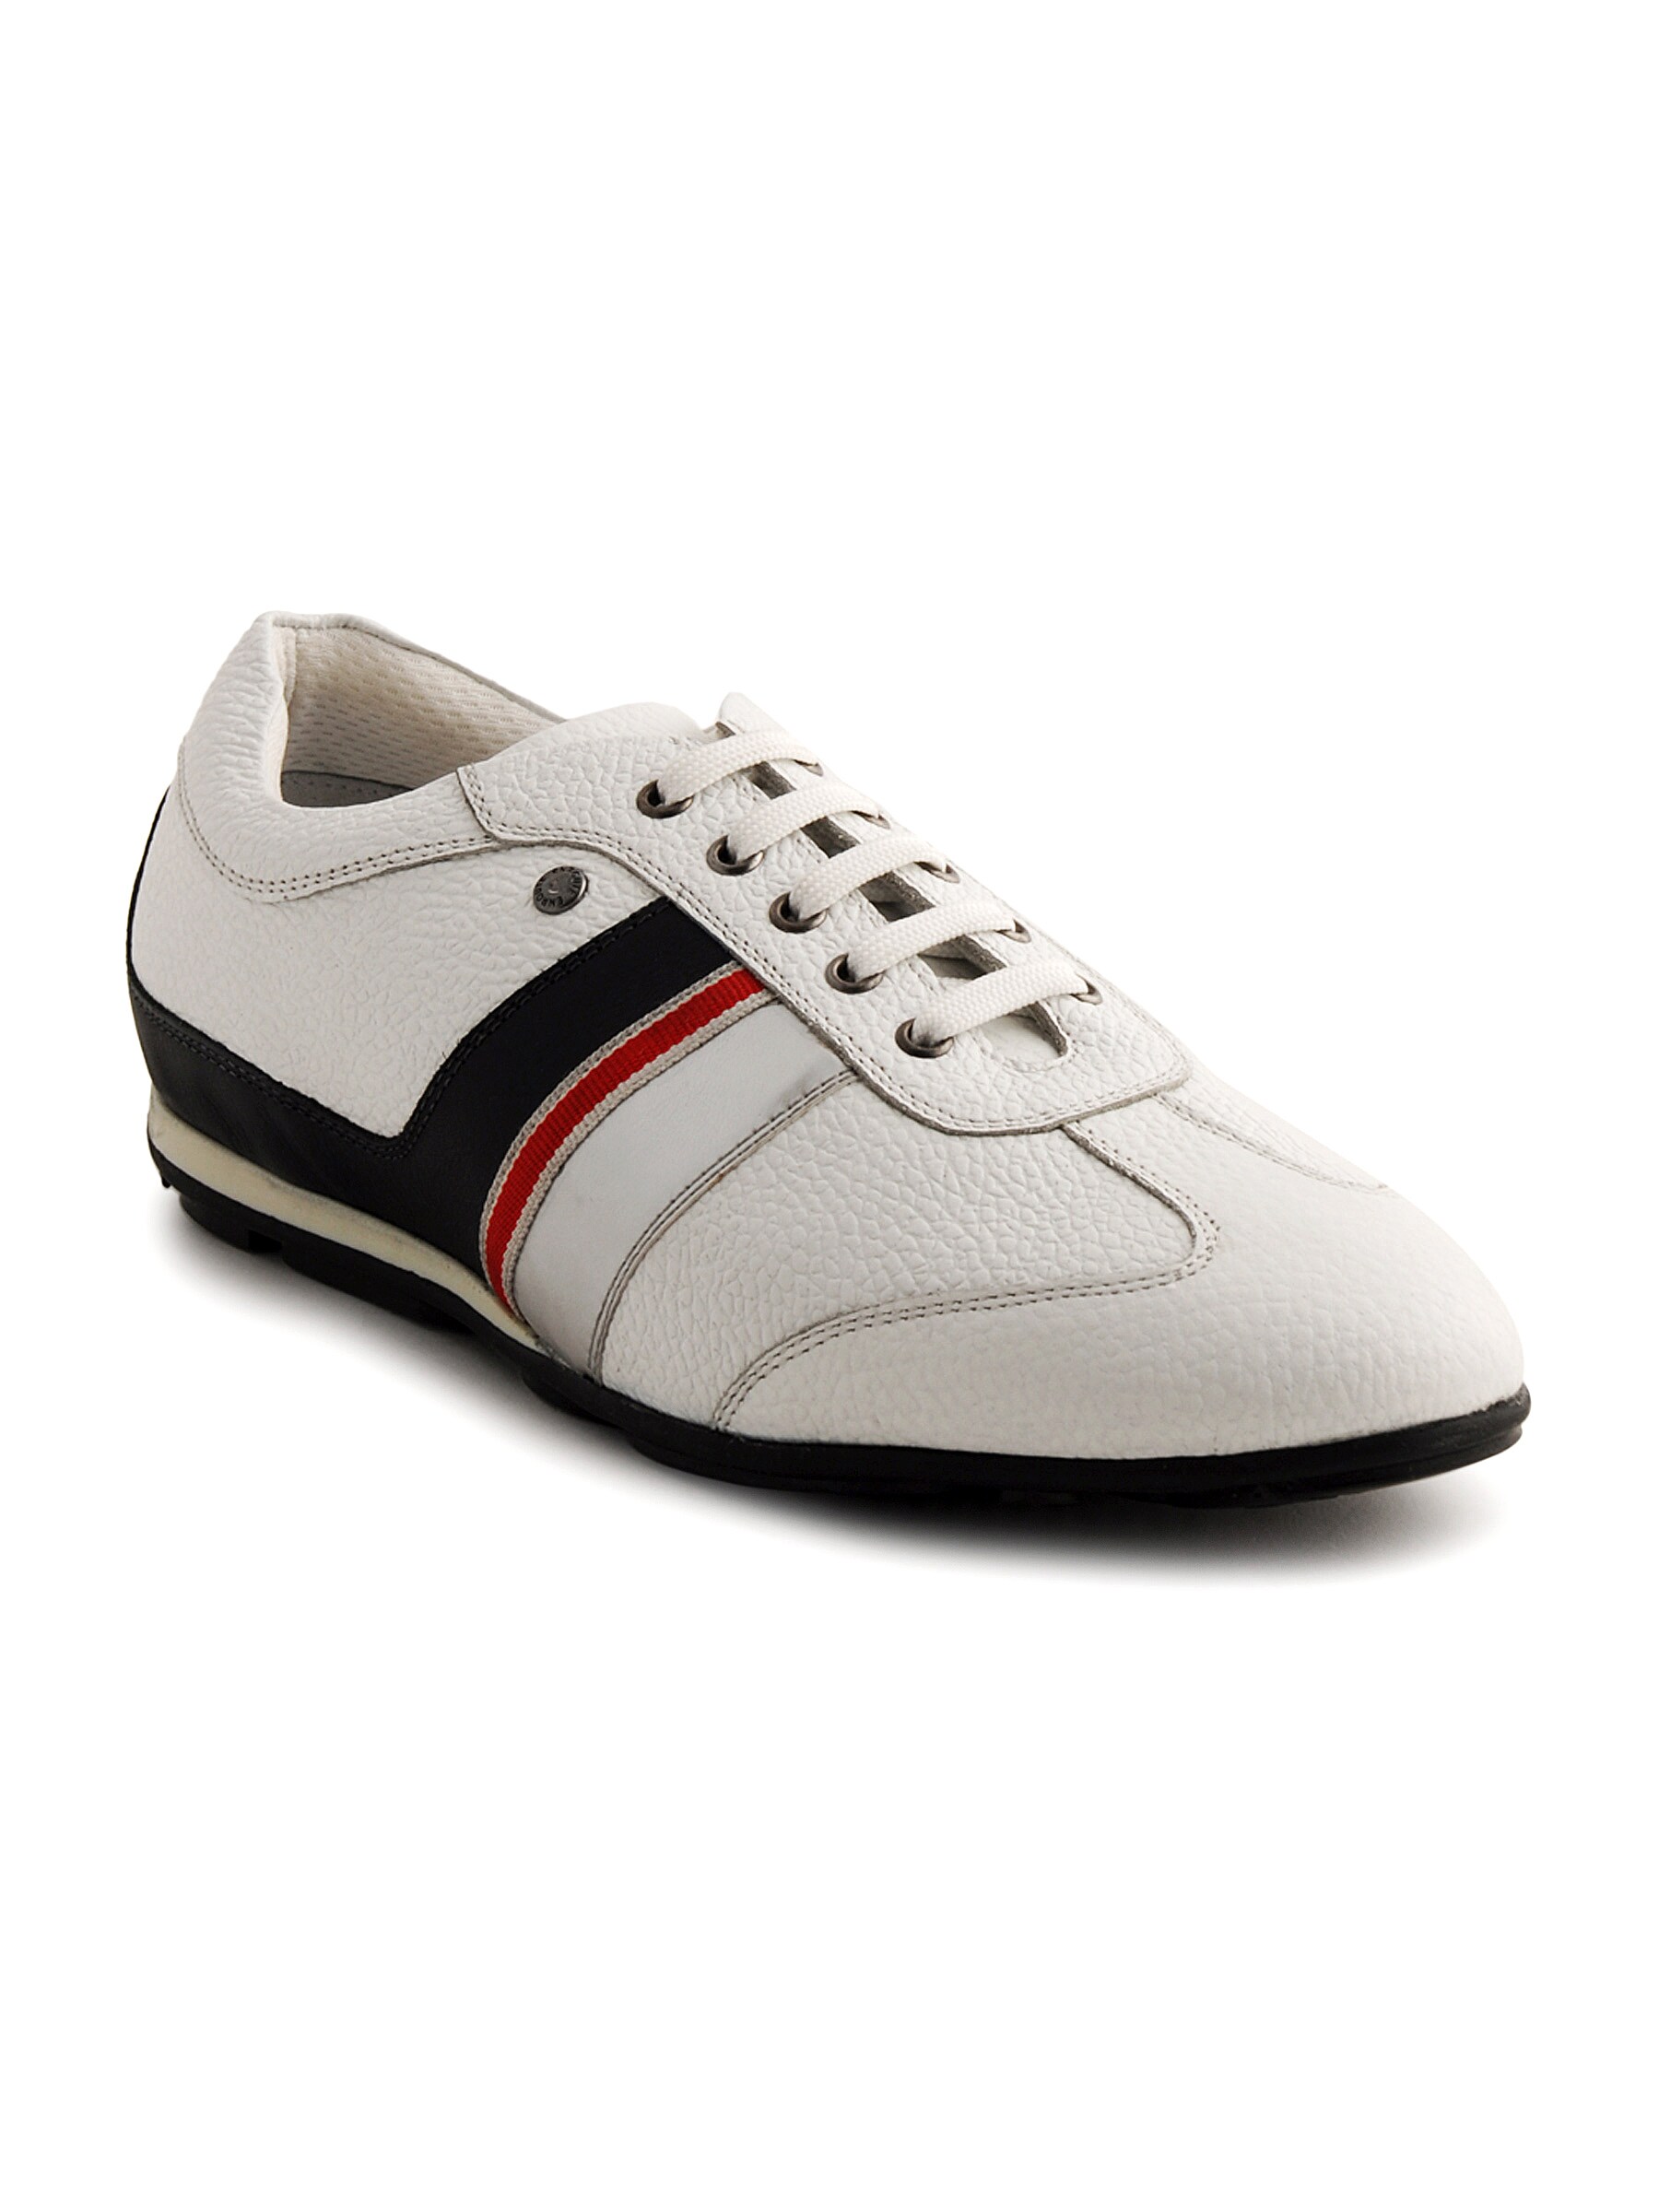 Enroute Men Leather White Casual Shoes